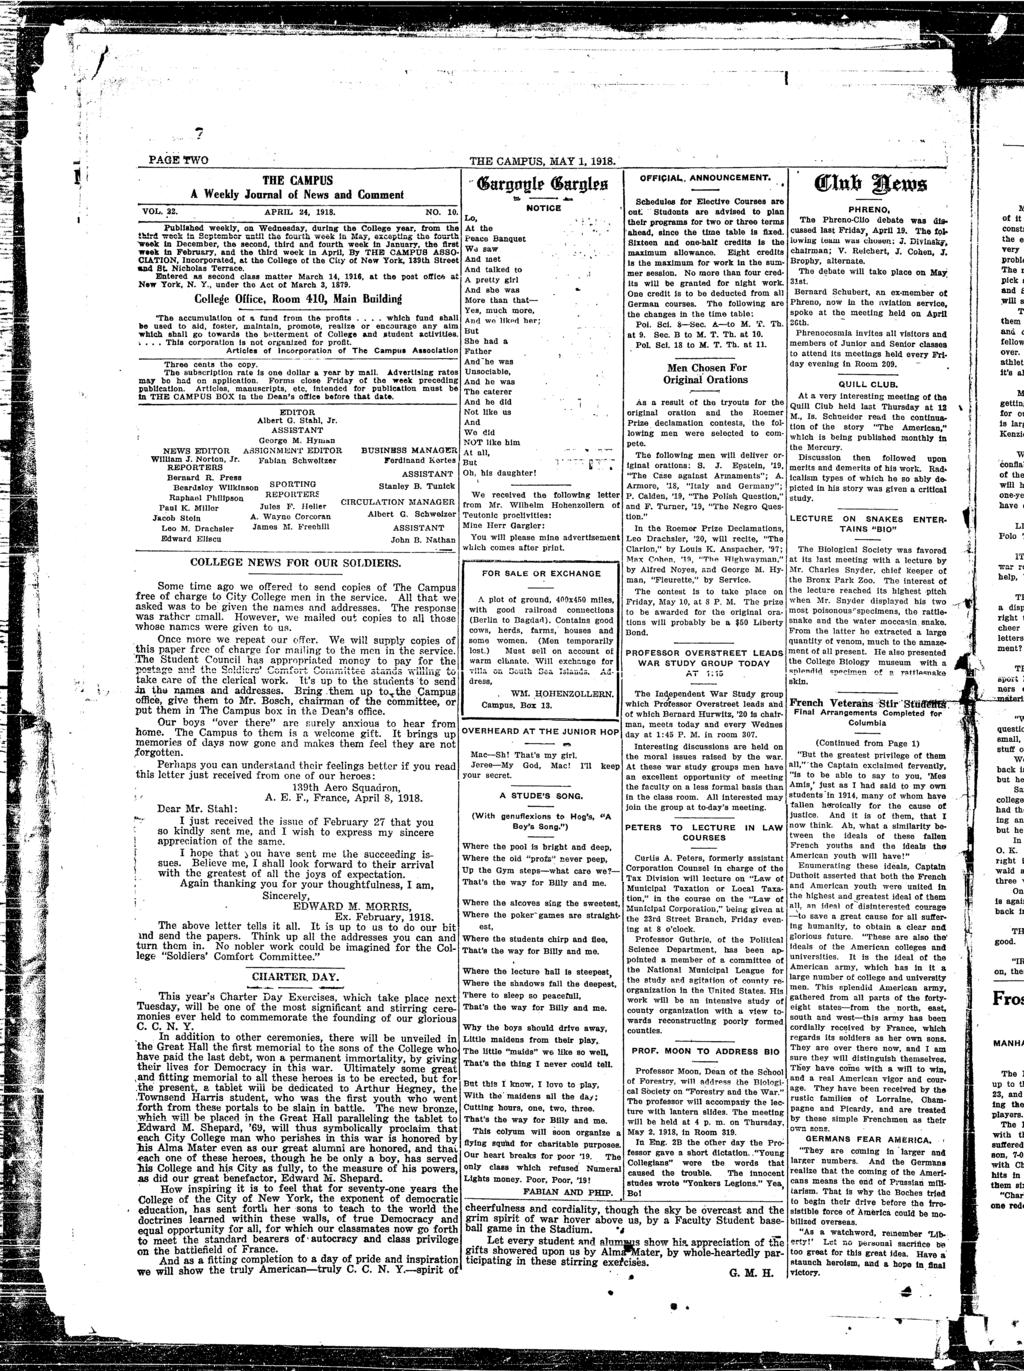 !. PAGE TWO THE CAMPUS A Weekly Joornal of News and Commen VOL. 22. APRL 24 1918. NO. 10. Lo Publ1shed weekly on Wednesday. durng he College year. ram he A he!1!rd "Week 1n Sepember unn h6 fou.r.h weak n.